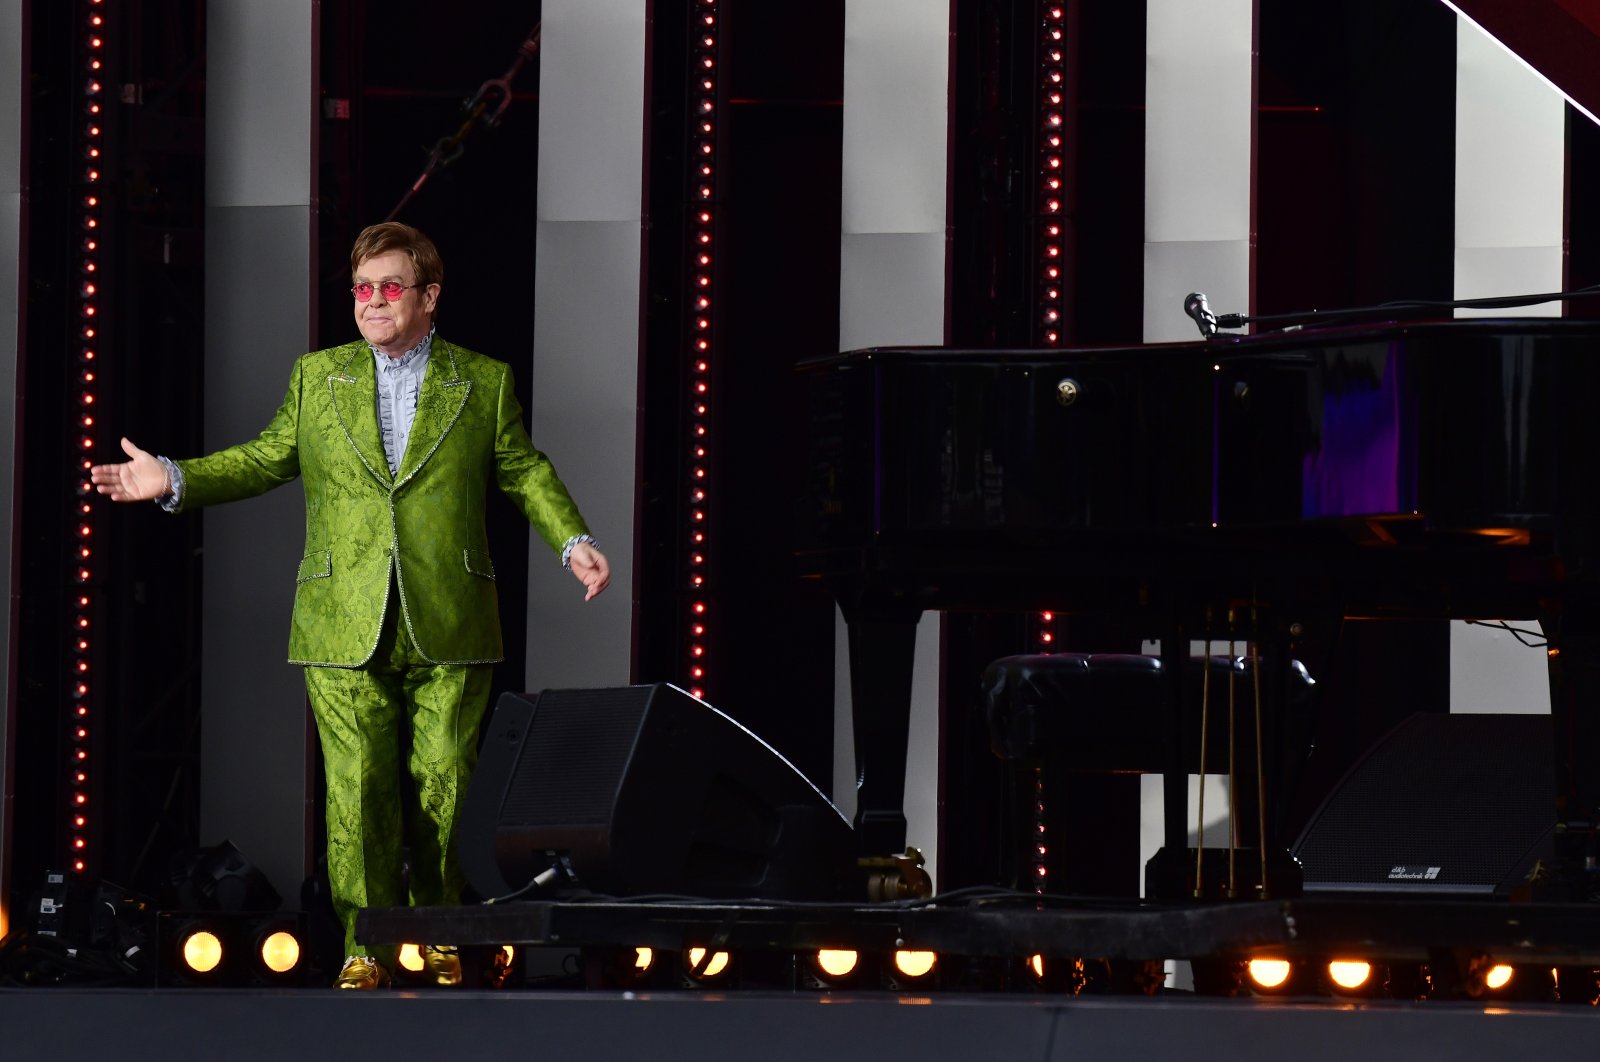 Elton John performs on stage during Global Citizen Live, in Paris, France, Sept. 25, 2021. (Getty Images)